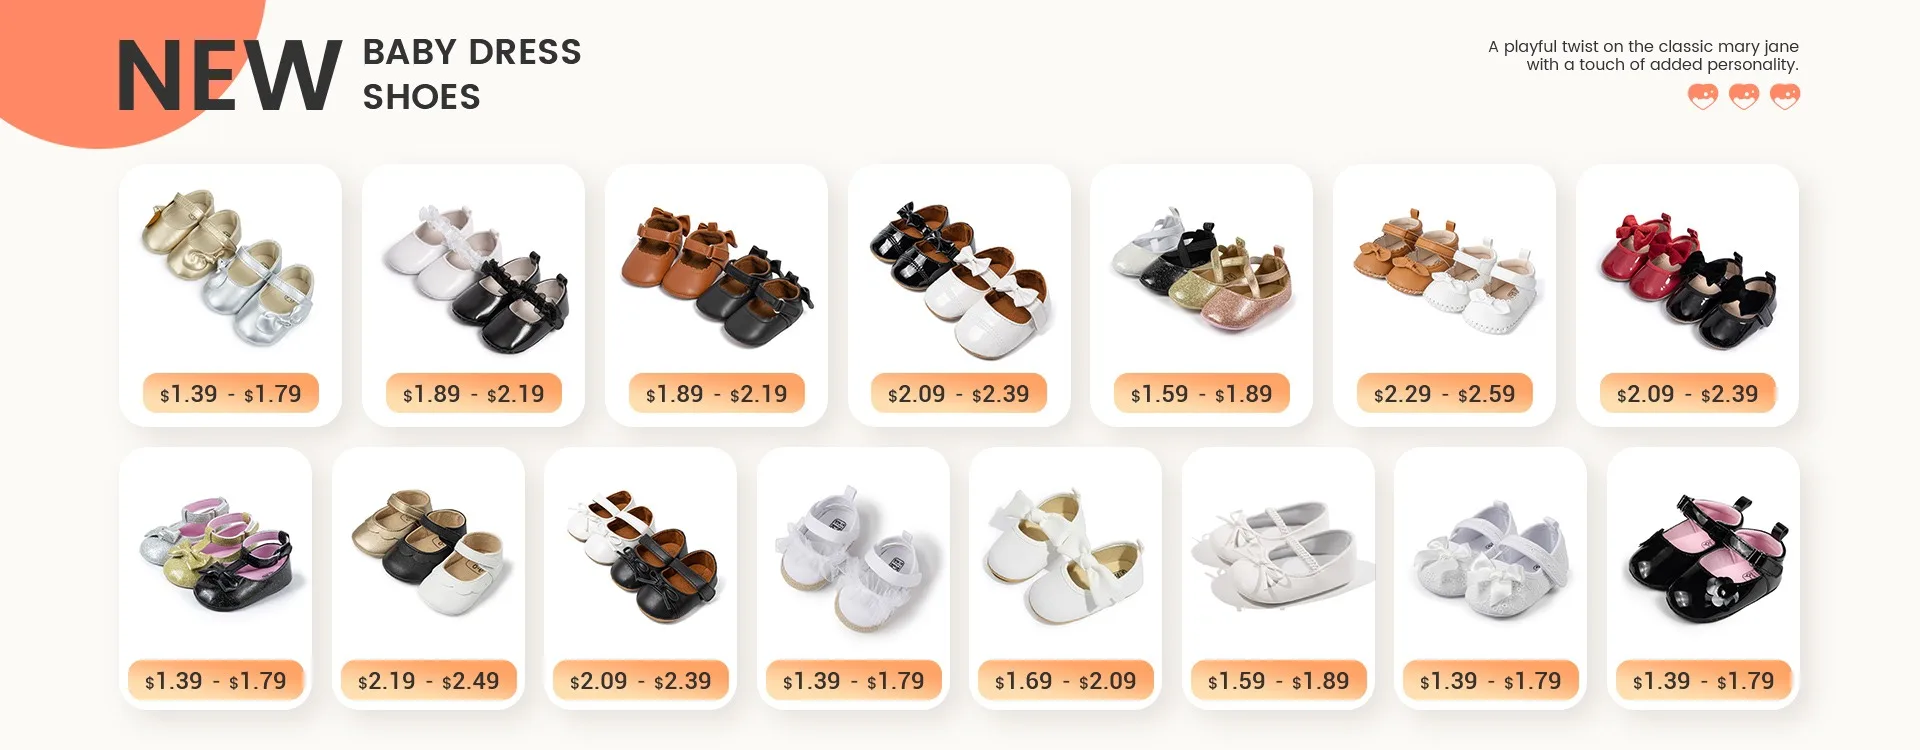 Dongguan Huamei Impression Ecommerce Co., Ltd. - Baby Shoes, Baby Boots